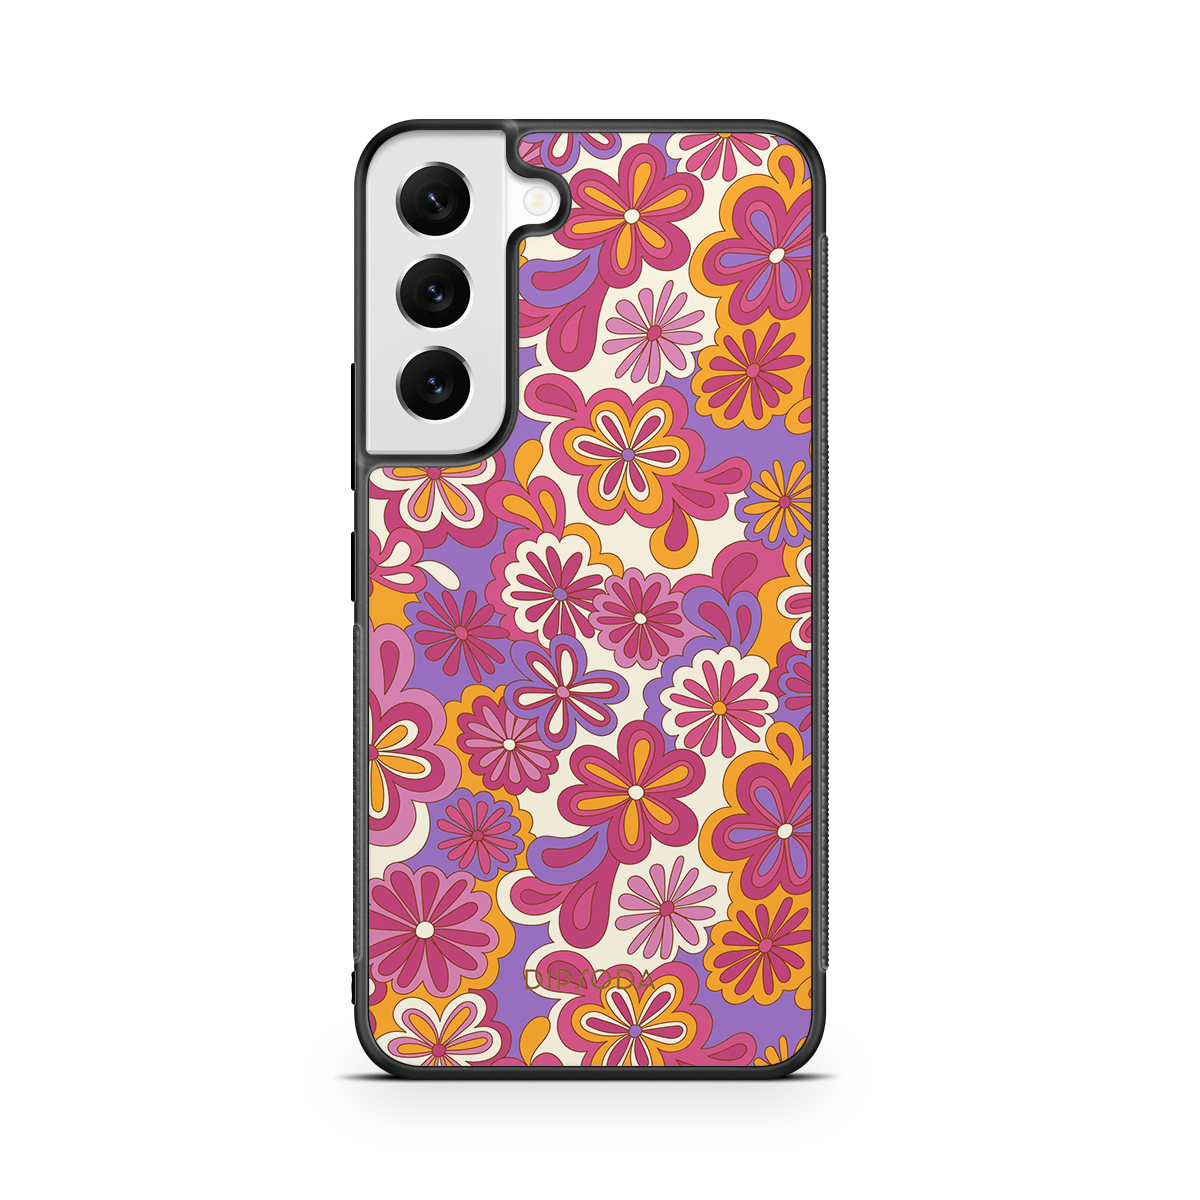 Brighter Days Rubber Phone Case